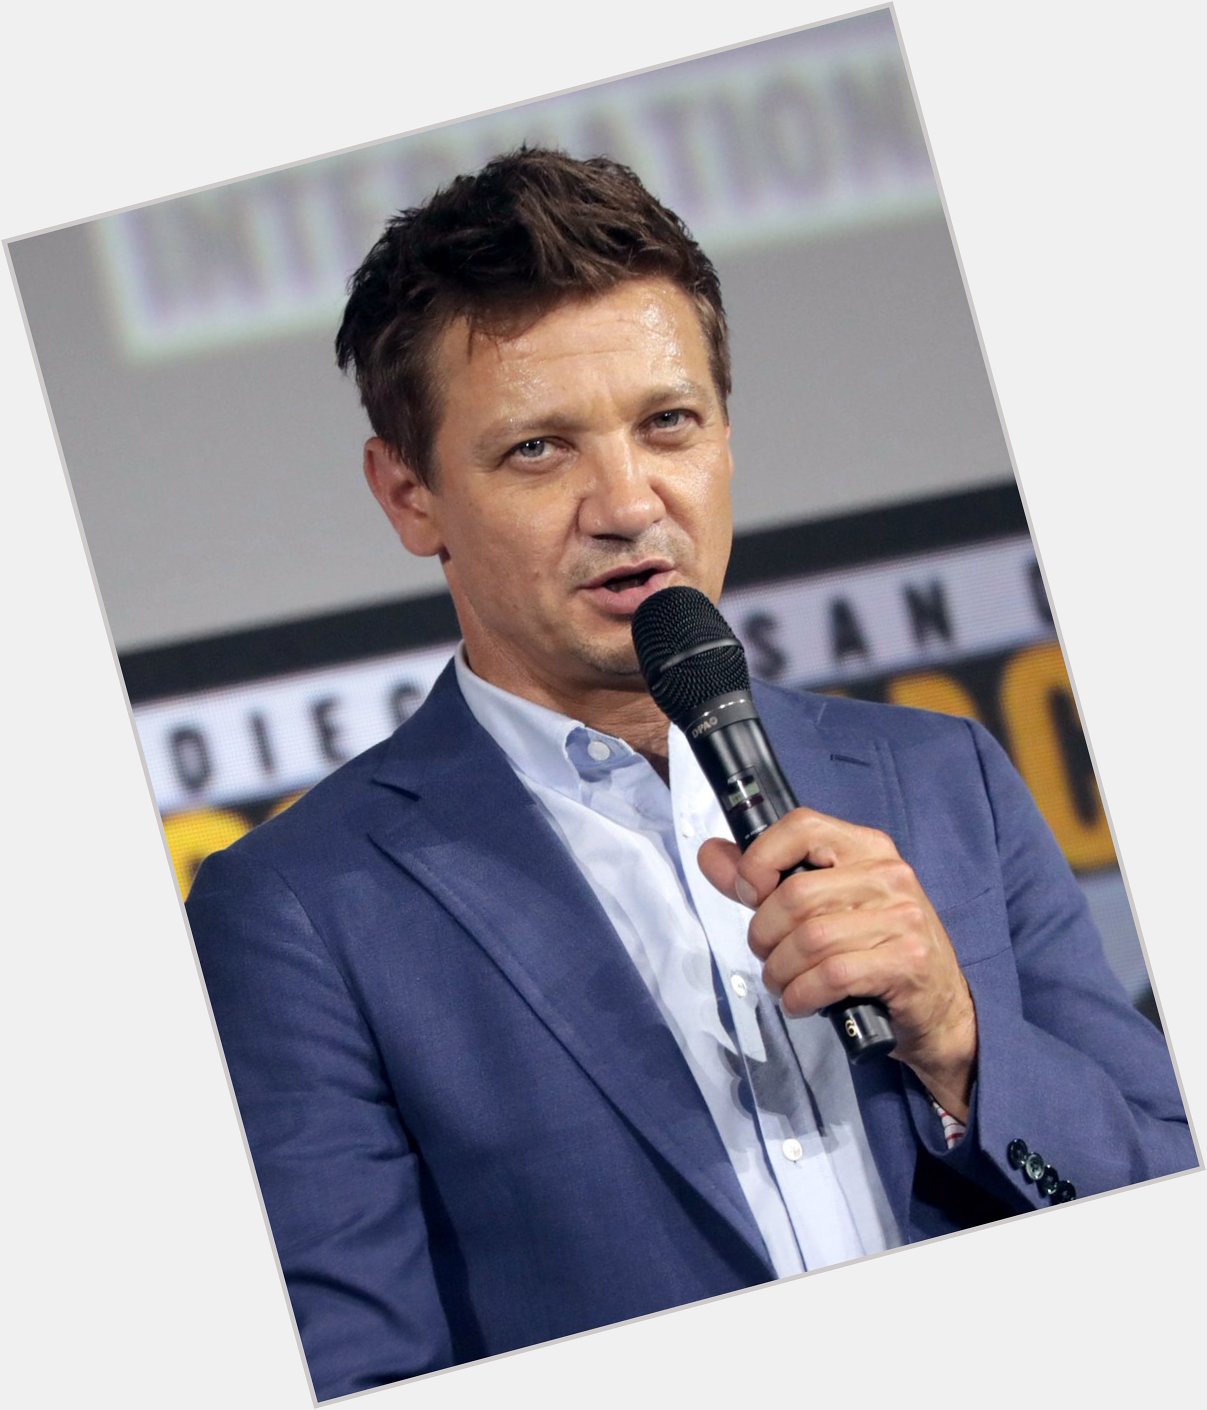 Wishing a Happy 50th Birthday to Jeremy Renner!      